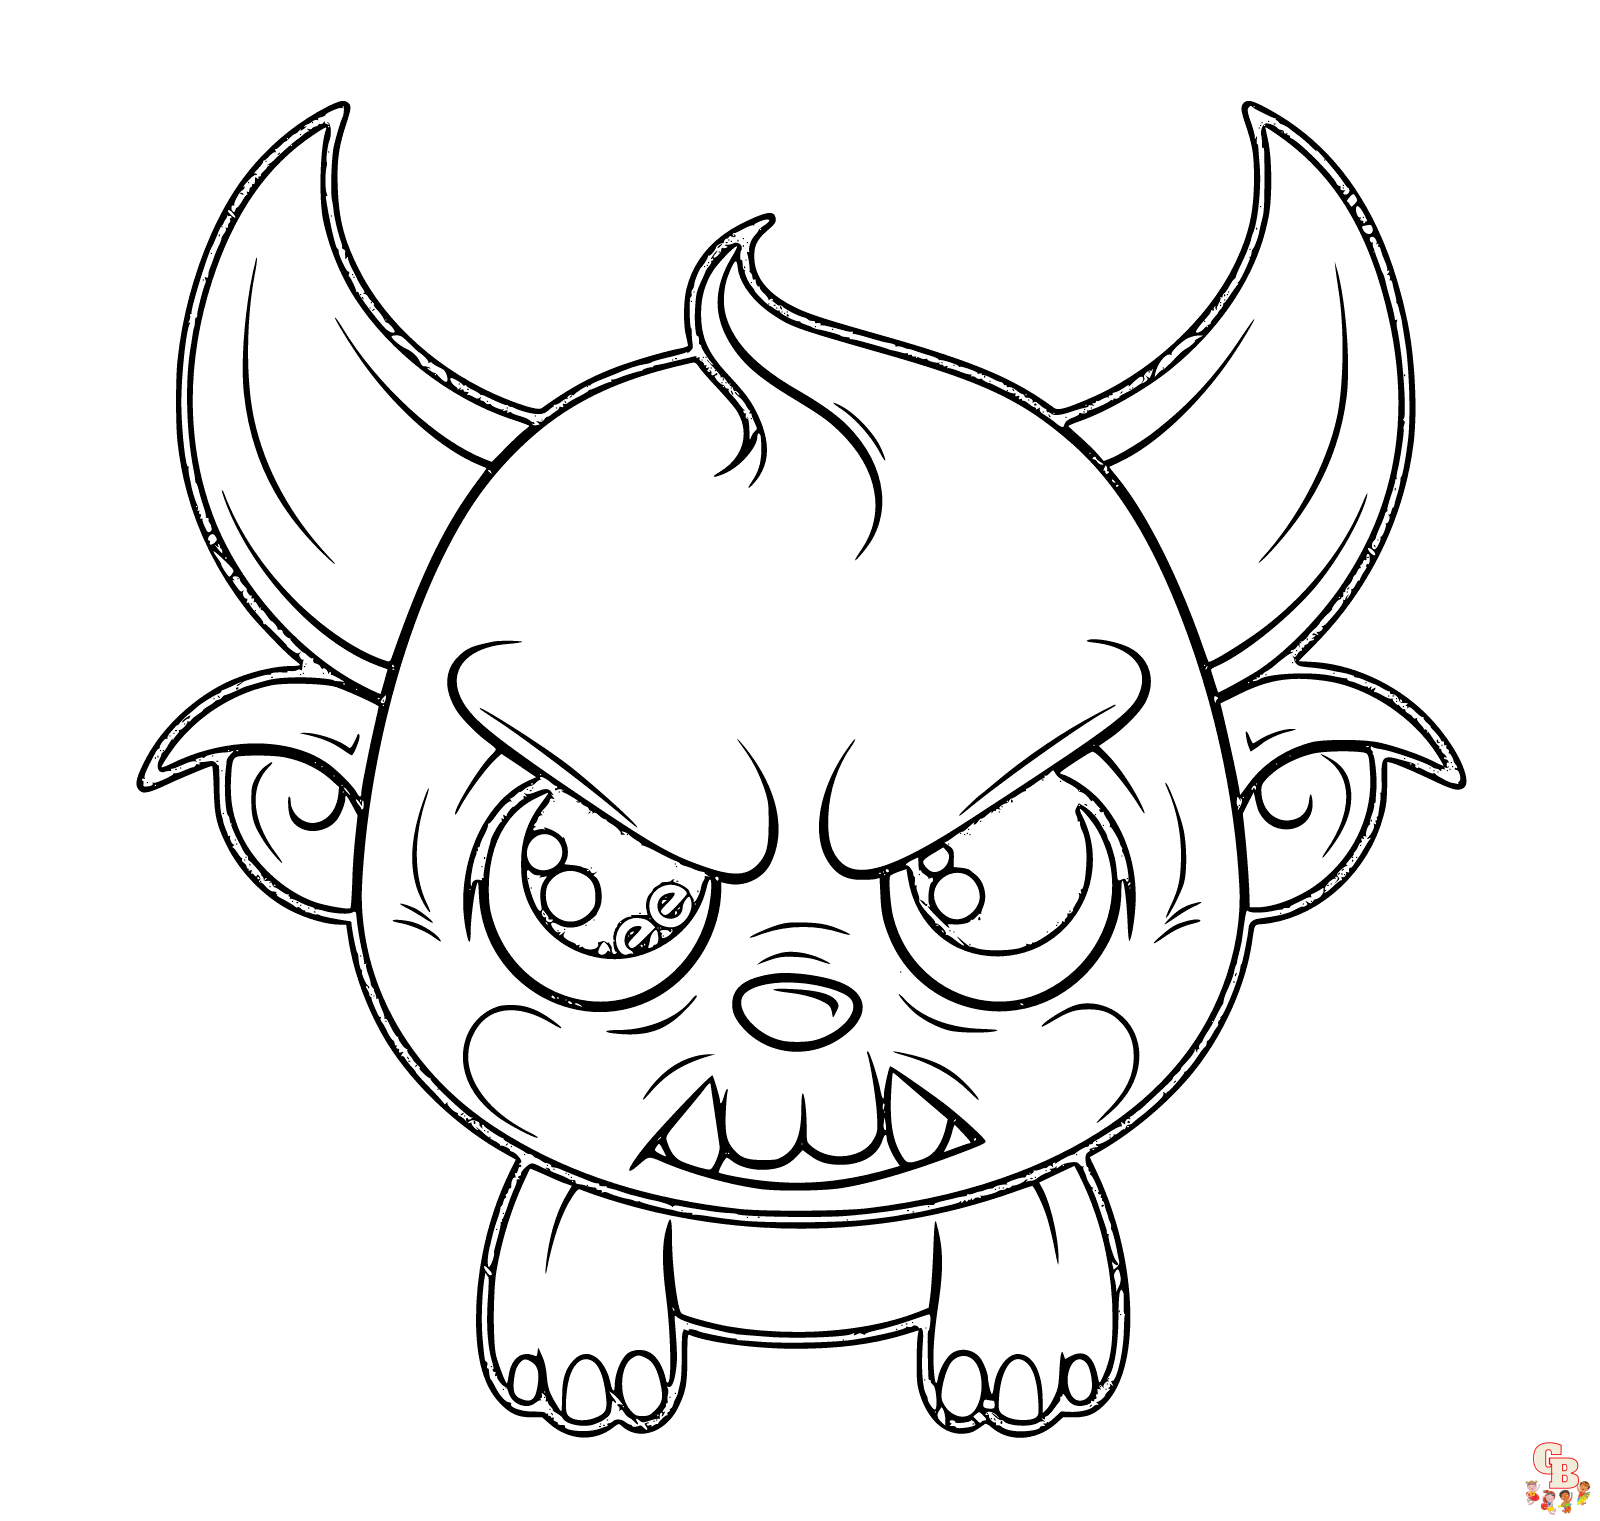 Devil coloring pages to print